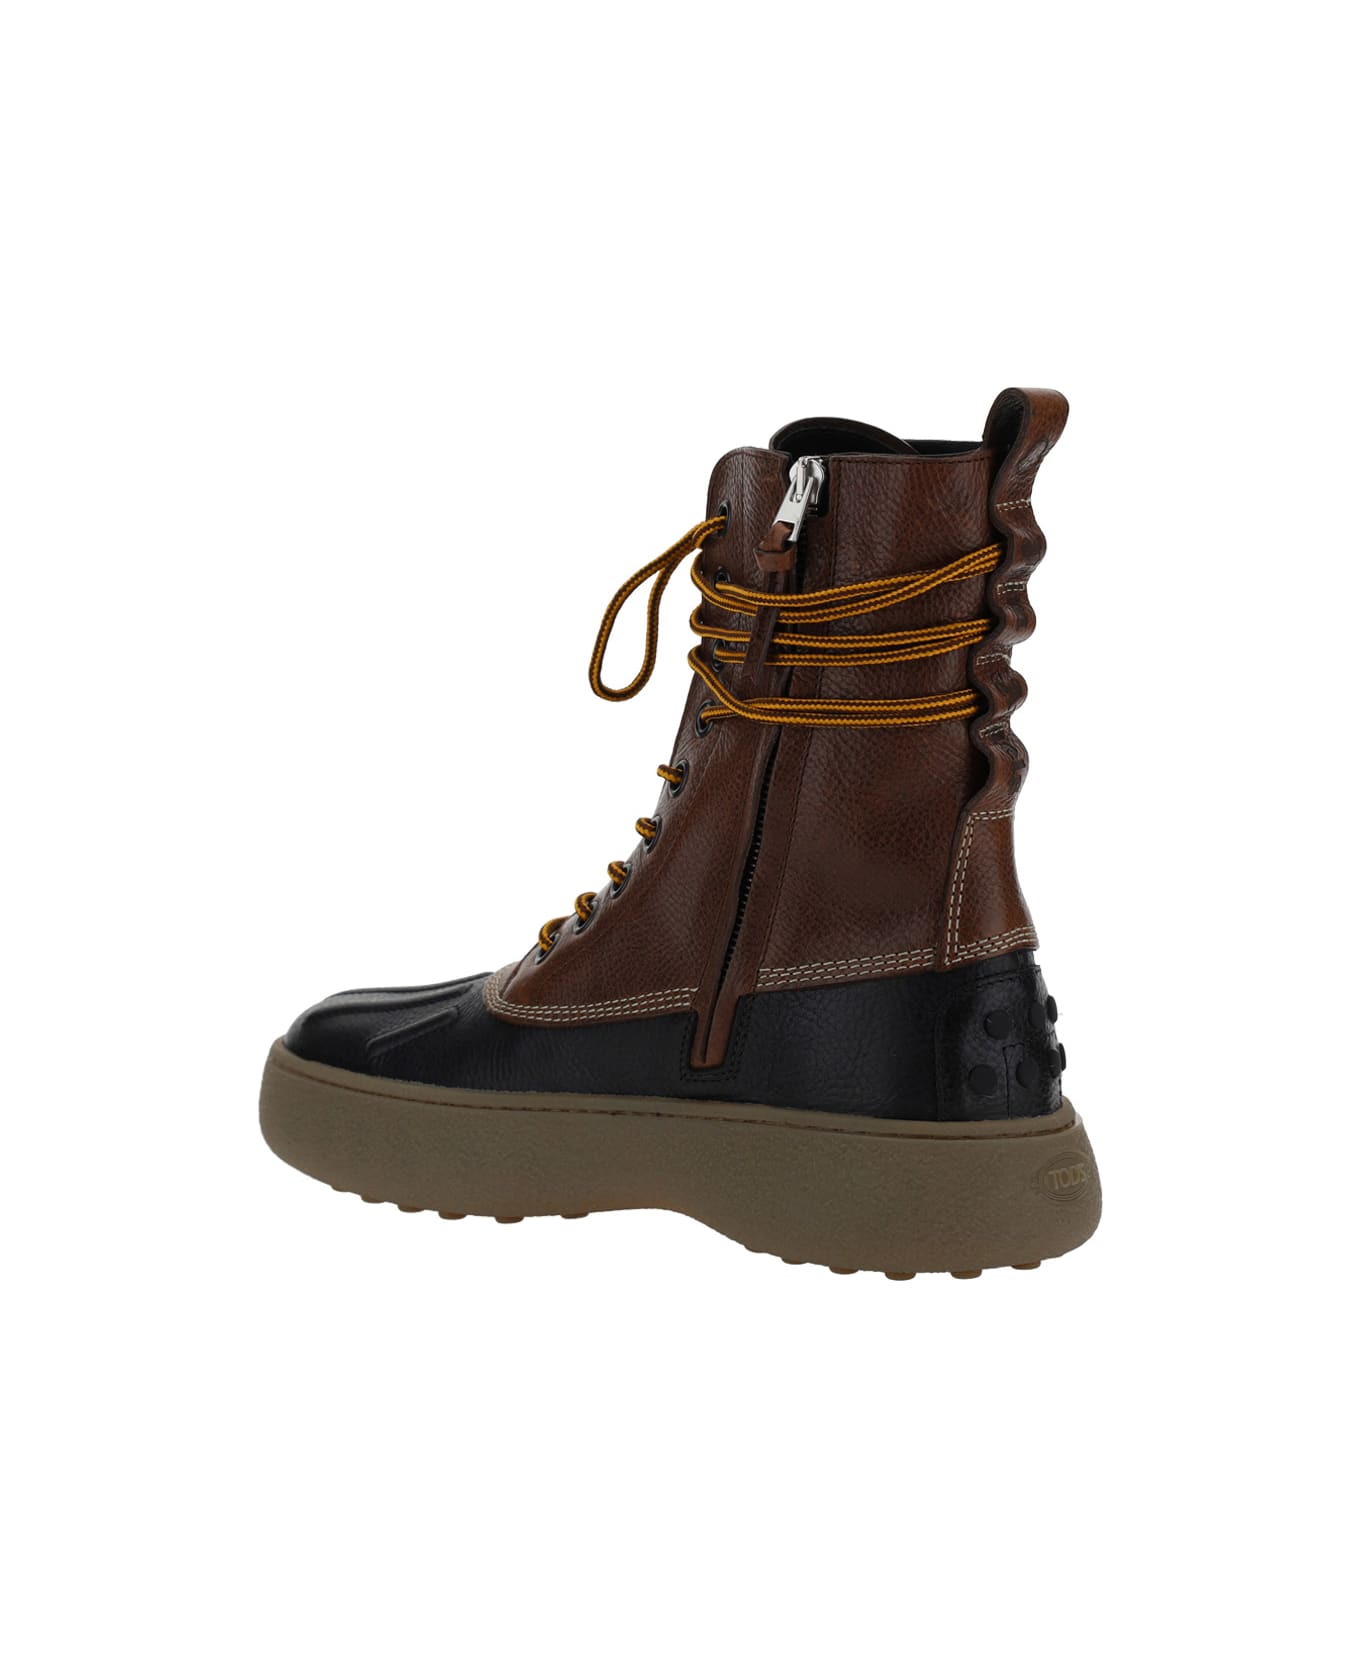 Moncler X Palm Angels Palm Angels X Moncler Winter Boots - BROWN